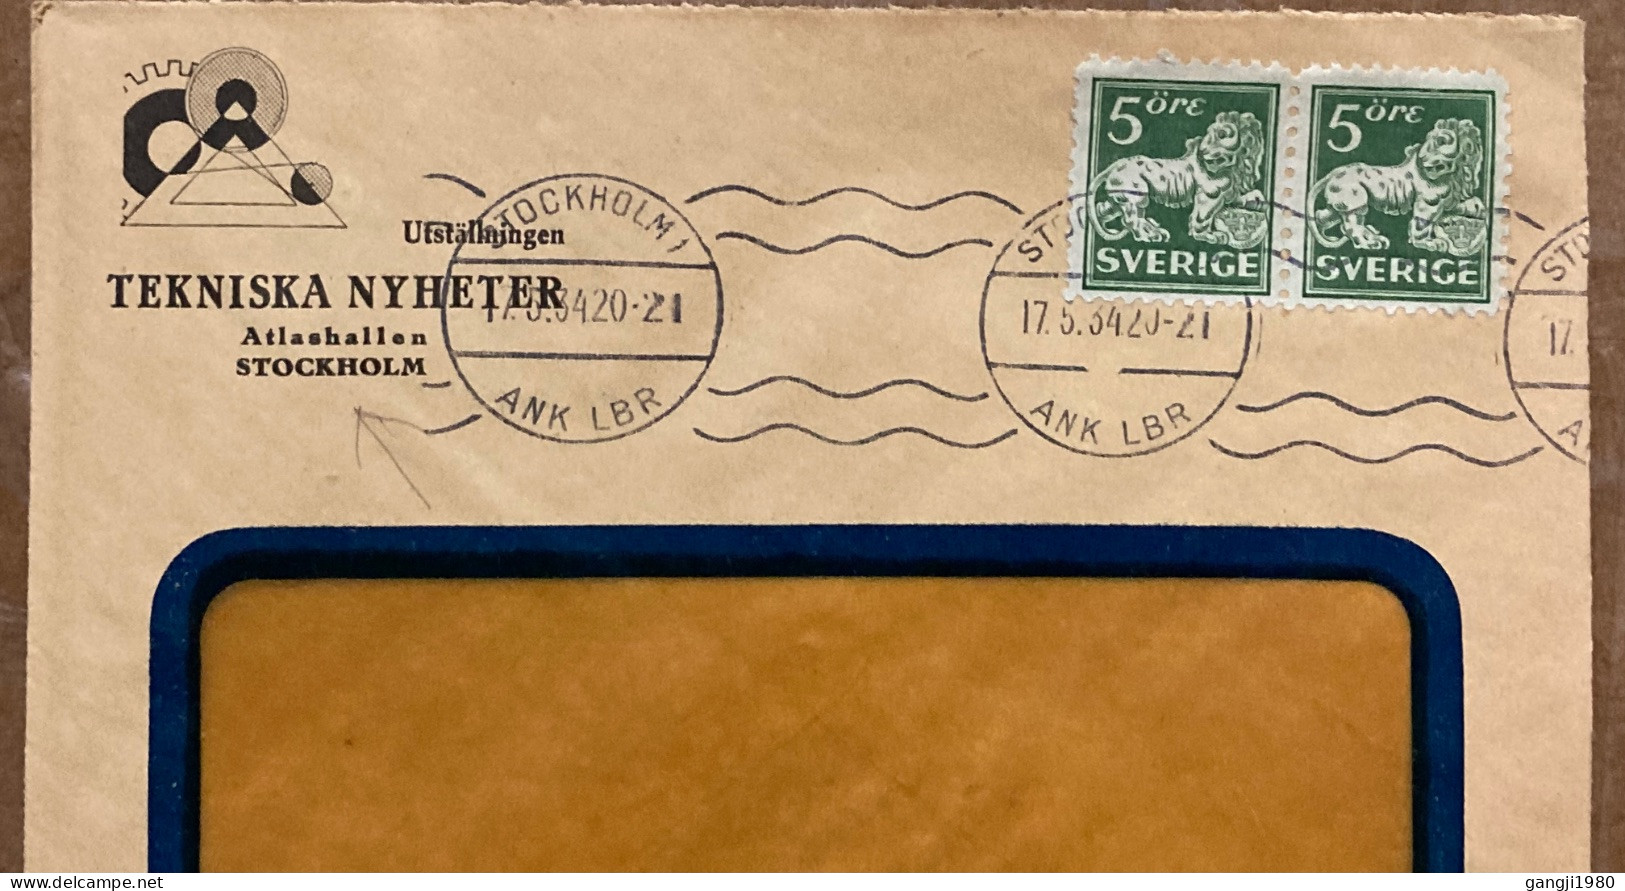 SWEDEN 1934, ADVERTISING COVER USED, TECHNICAL NEWS & EXHIBITION, STOCKHOLM CITY CANCEL, LION  2 STAMP. - Cartas & Documentos